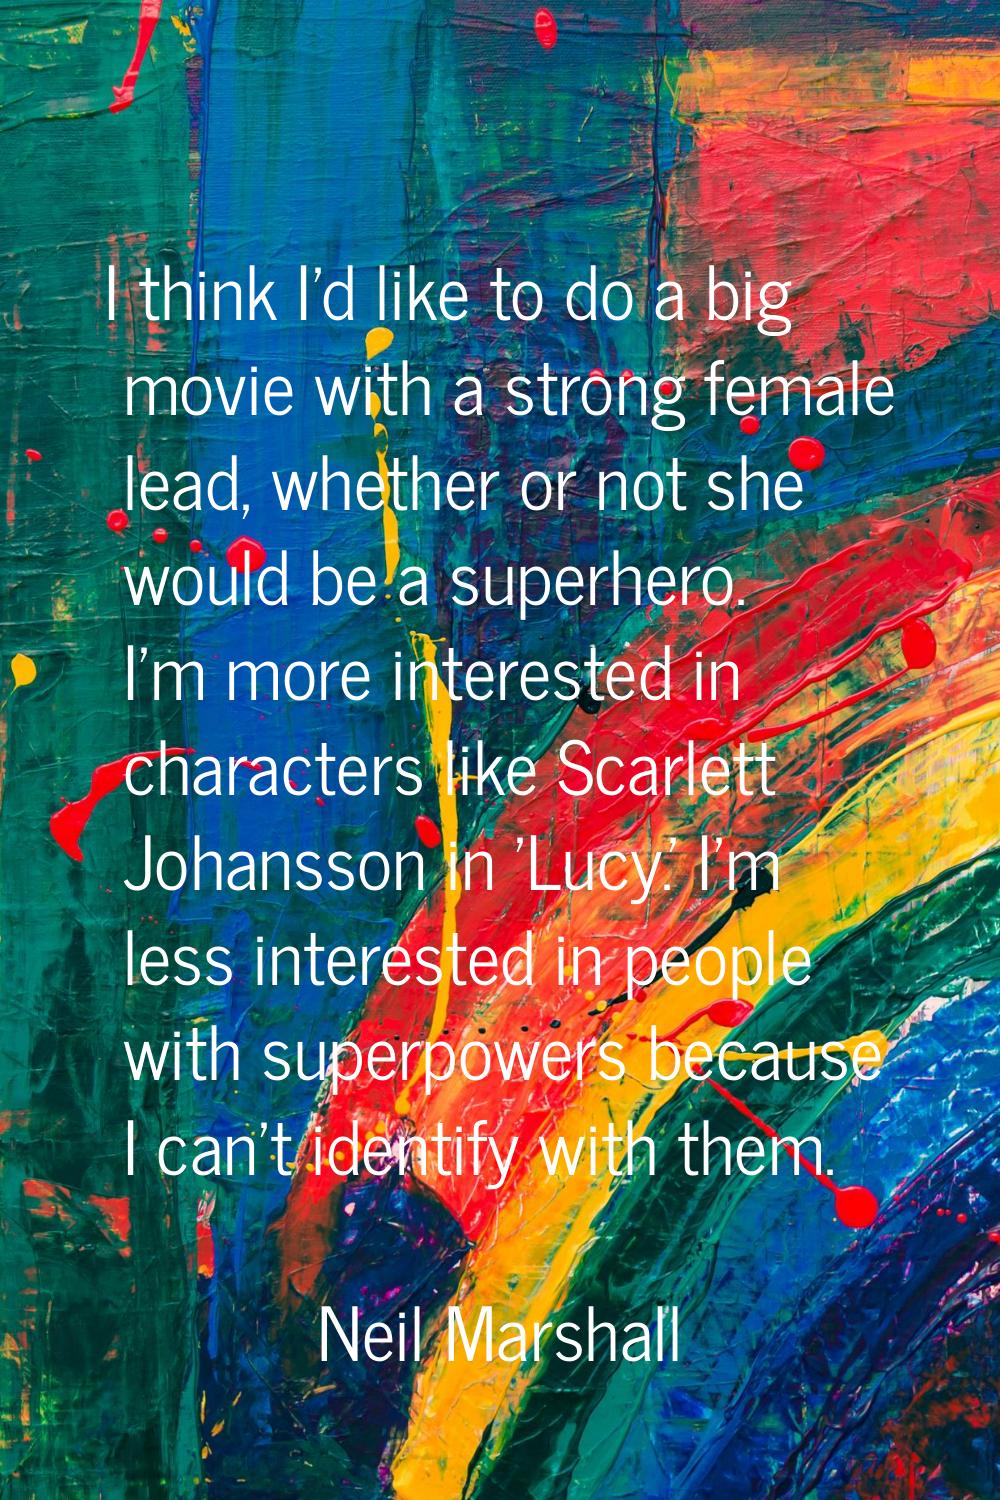 I think I'd like to do a big movie with a strong female lead, whether or not she would be a superhe